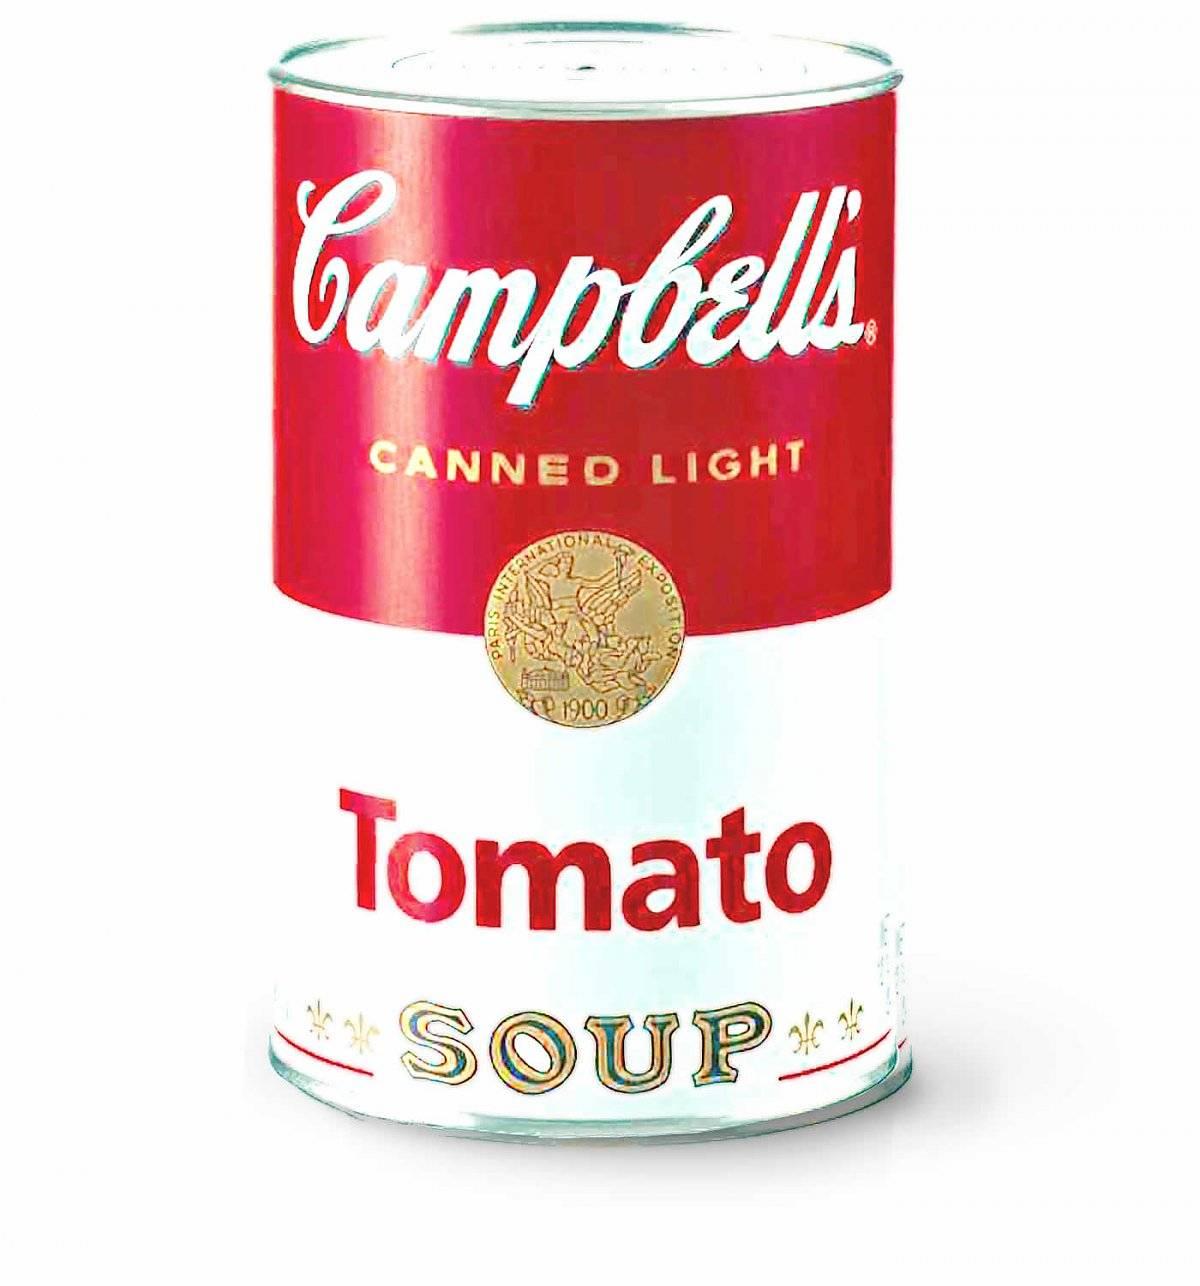 Canned Light is an ideal lamp in kitchens and over small dining tables and it was also designed to be used as a wall or hanging lamp that really can go anywhere you need good light or a pop of color. Creatively packaged, and with a special nod to